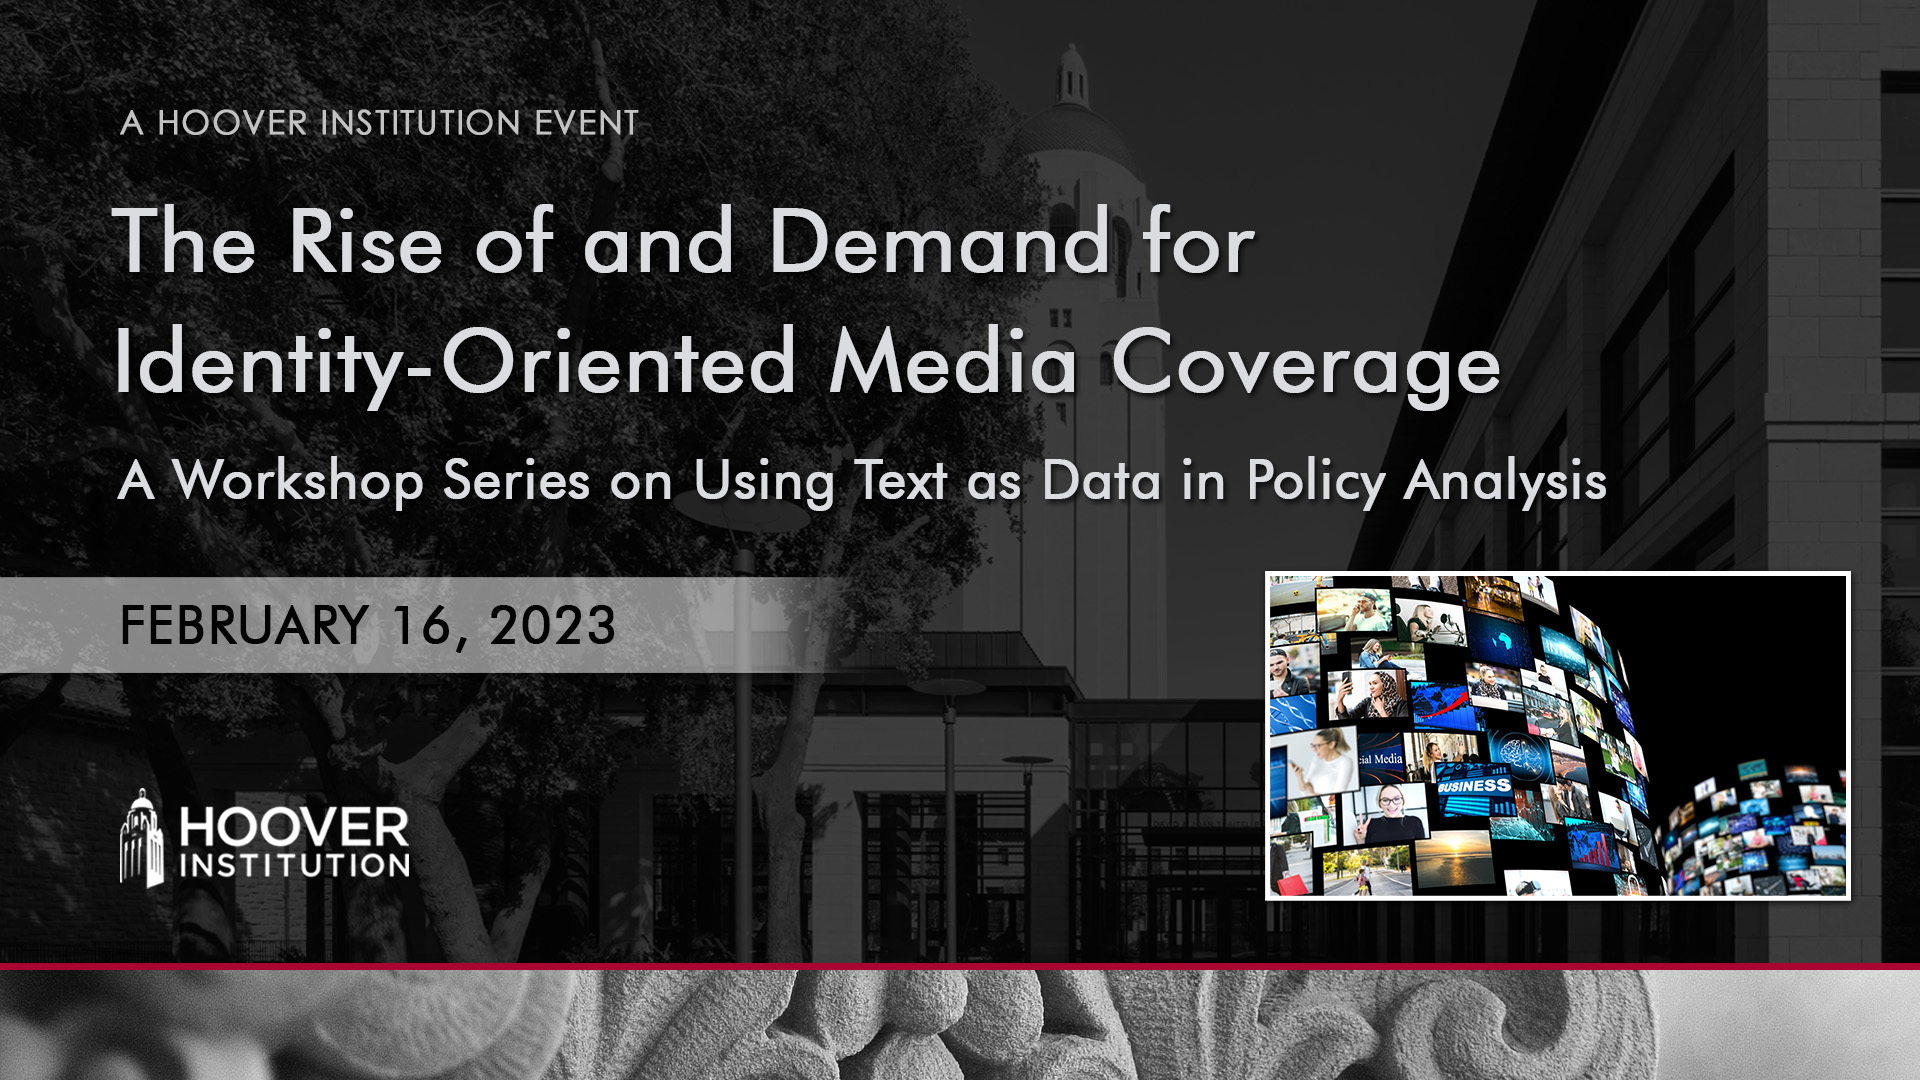 The Rise of and Demand for Identity-Oriented Media Coverage